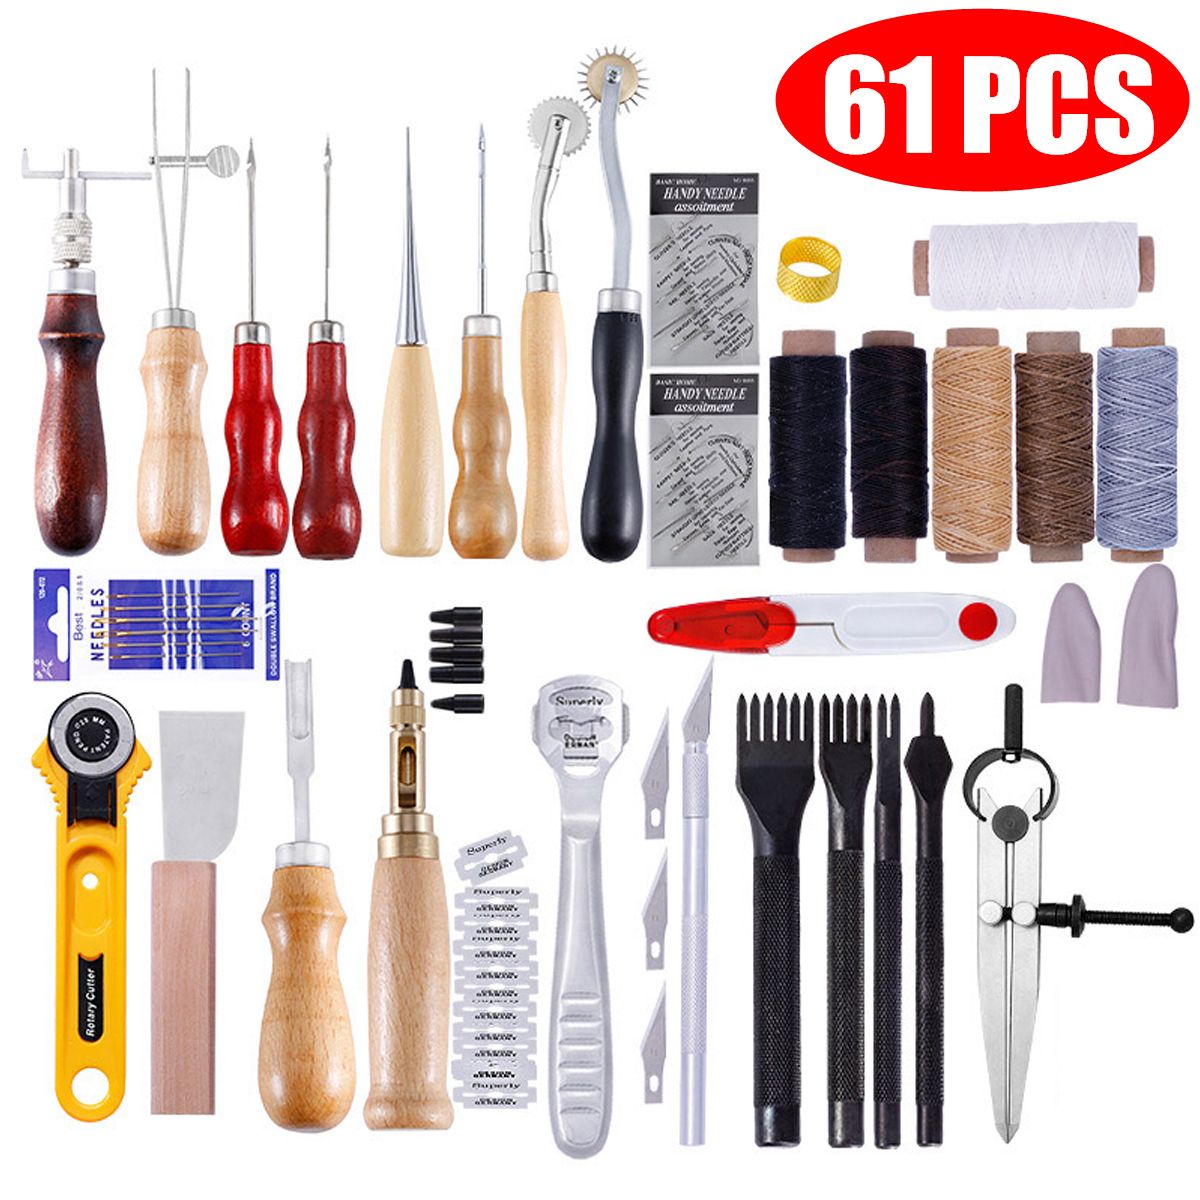 61Pcs-Leather-Craft-Tool-Kit-Hand-Sewing-Stitching-Punch-Carving-Saddle-Edger-1570180